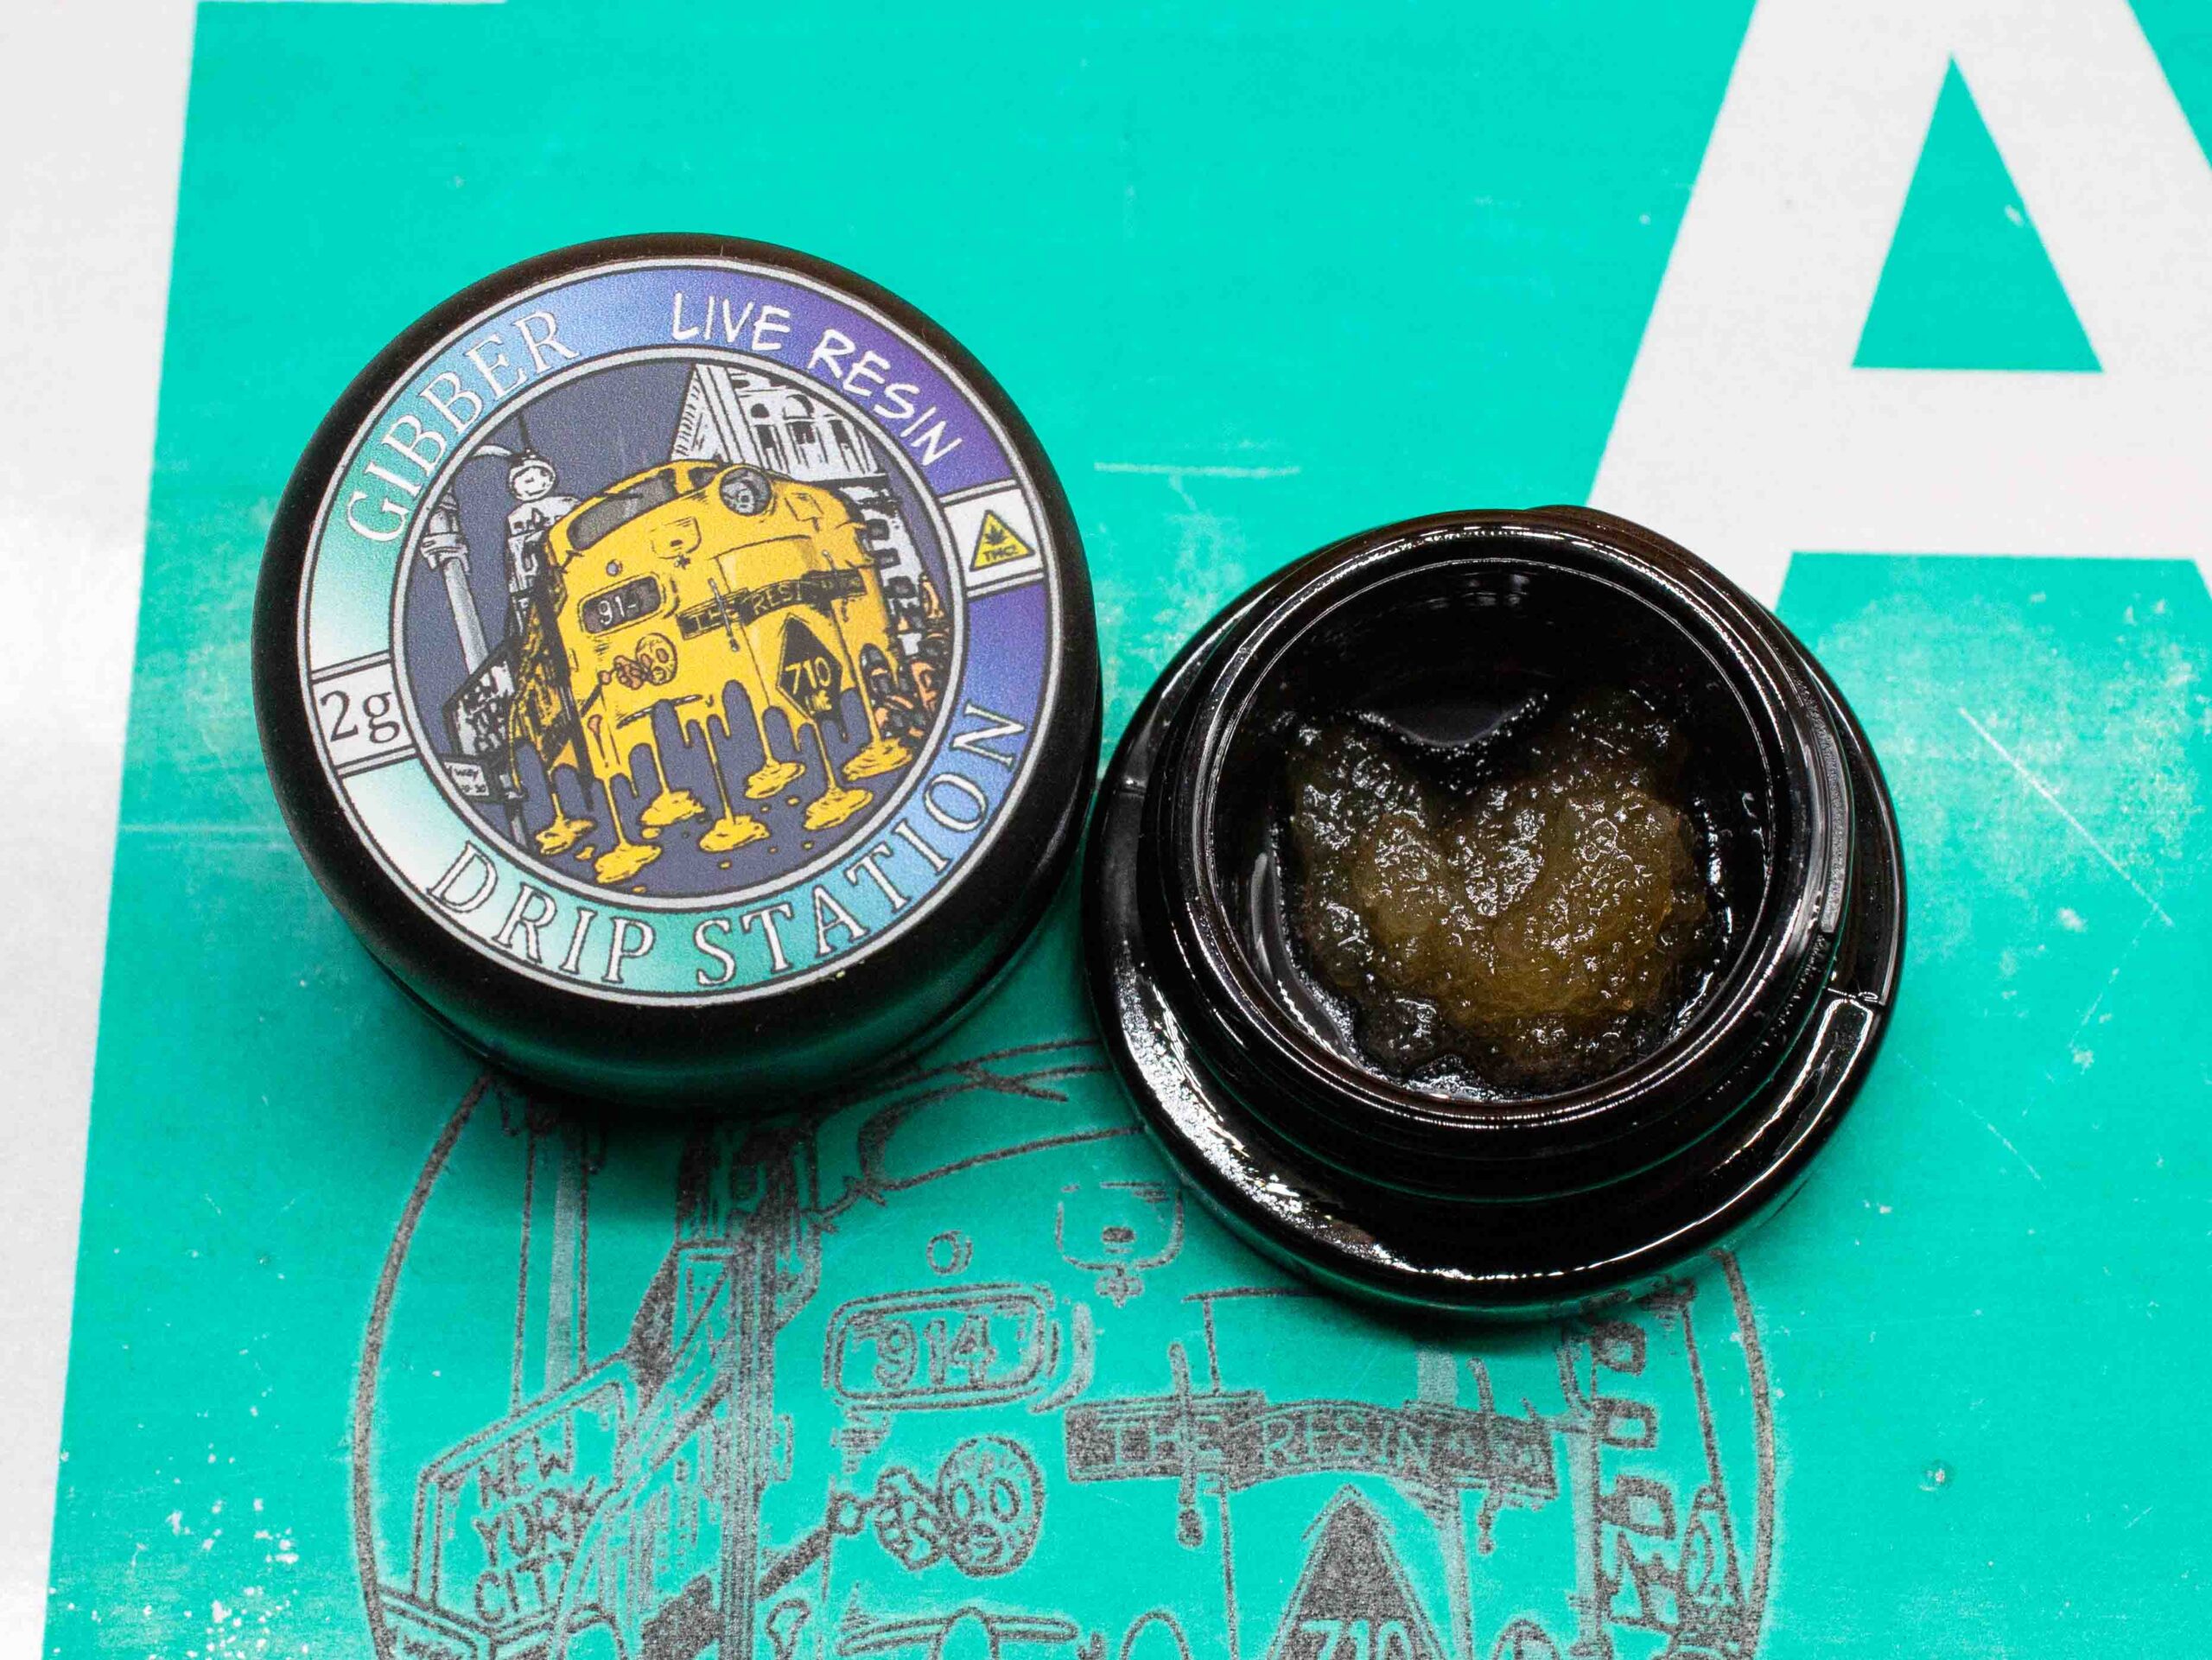 Drip Station 2g Live Resin NYC